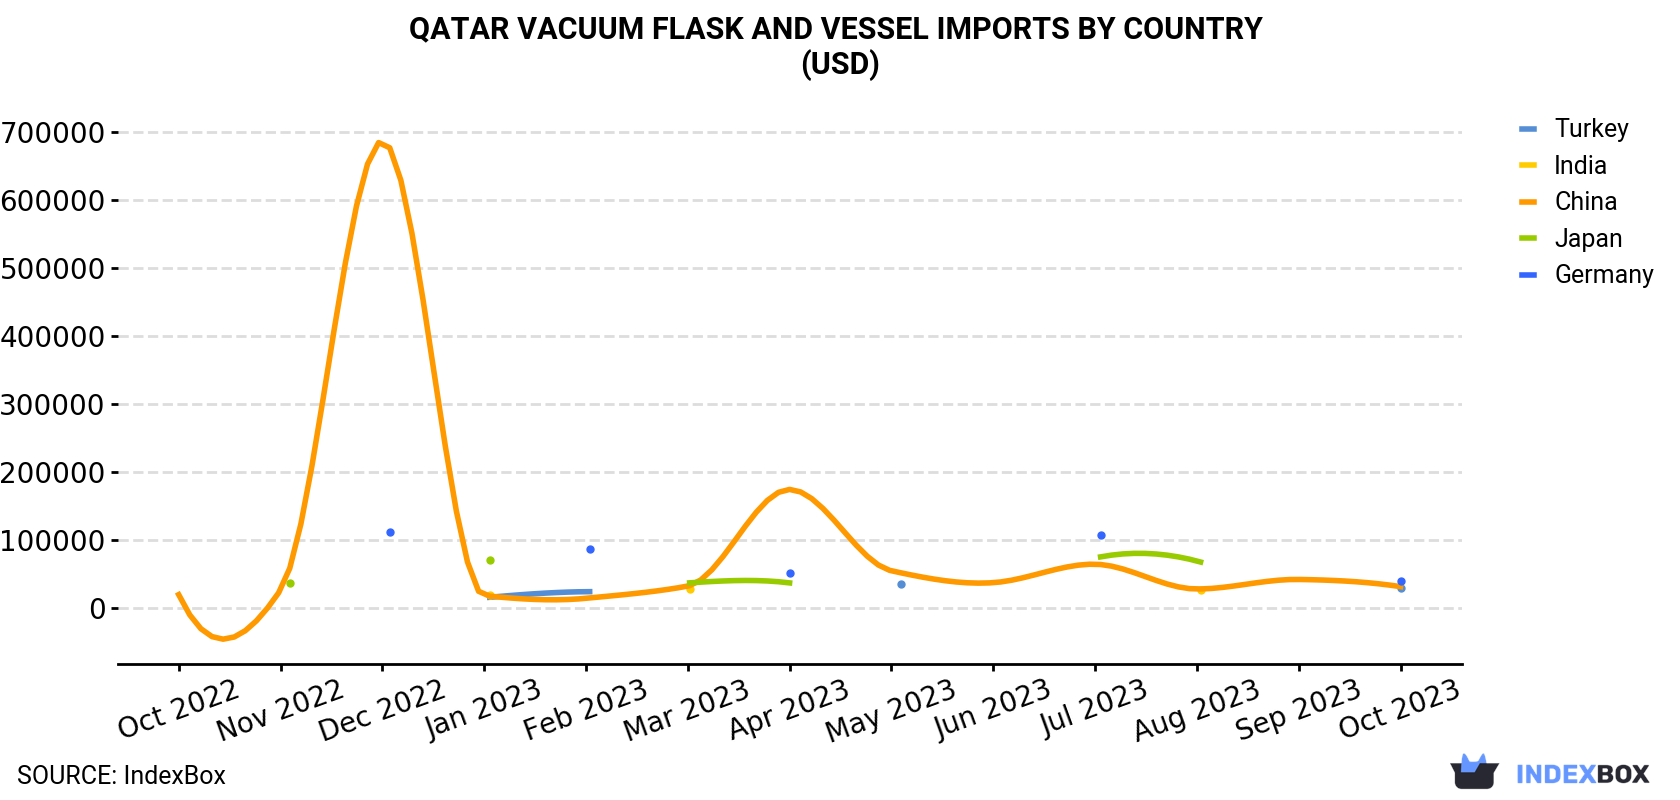 Qatar Vacuum Flask and Vessel Imports By Country (USD)